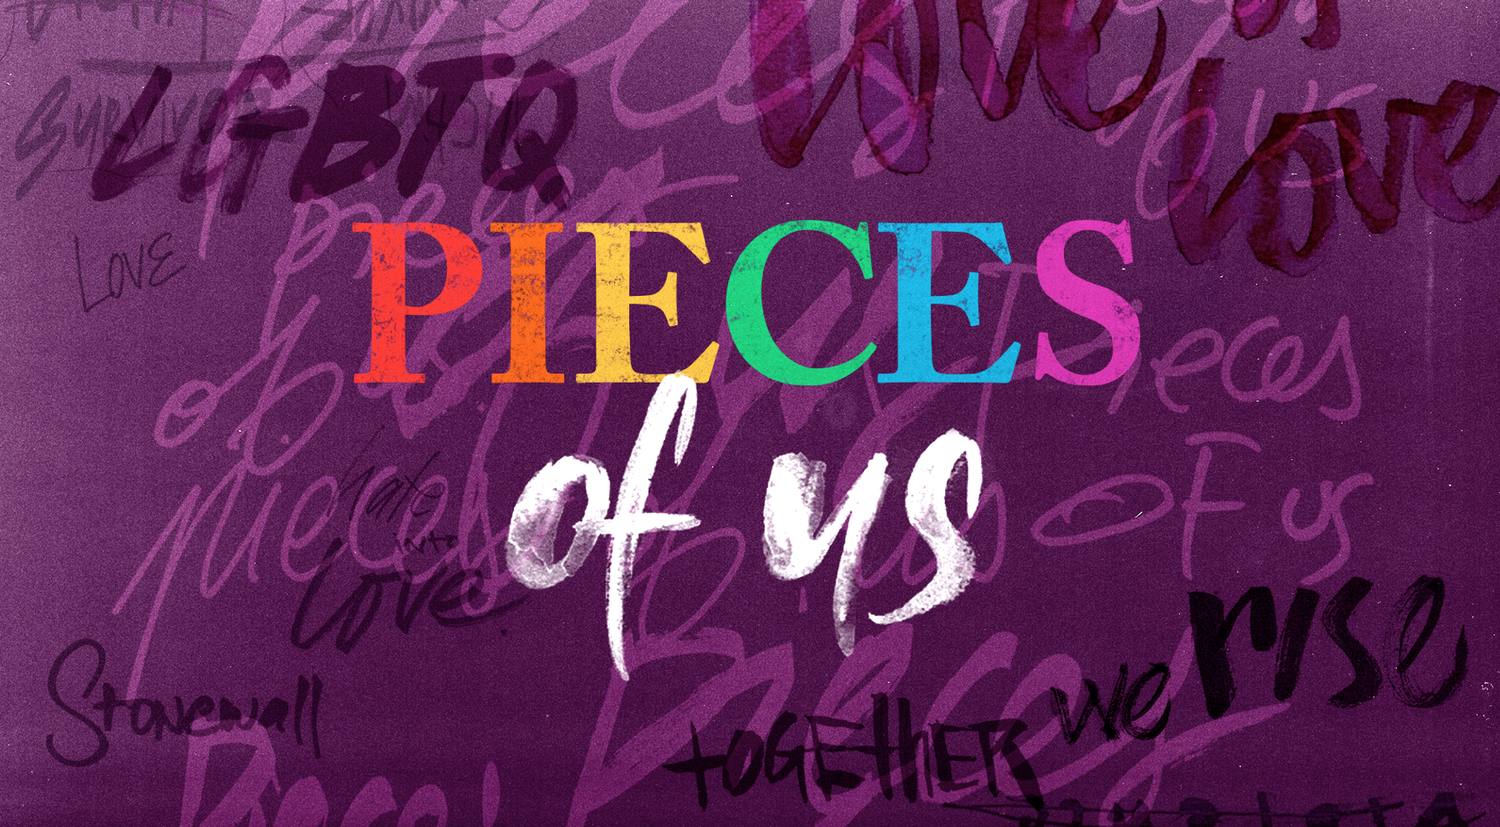 Pieces of Us NTV